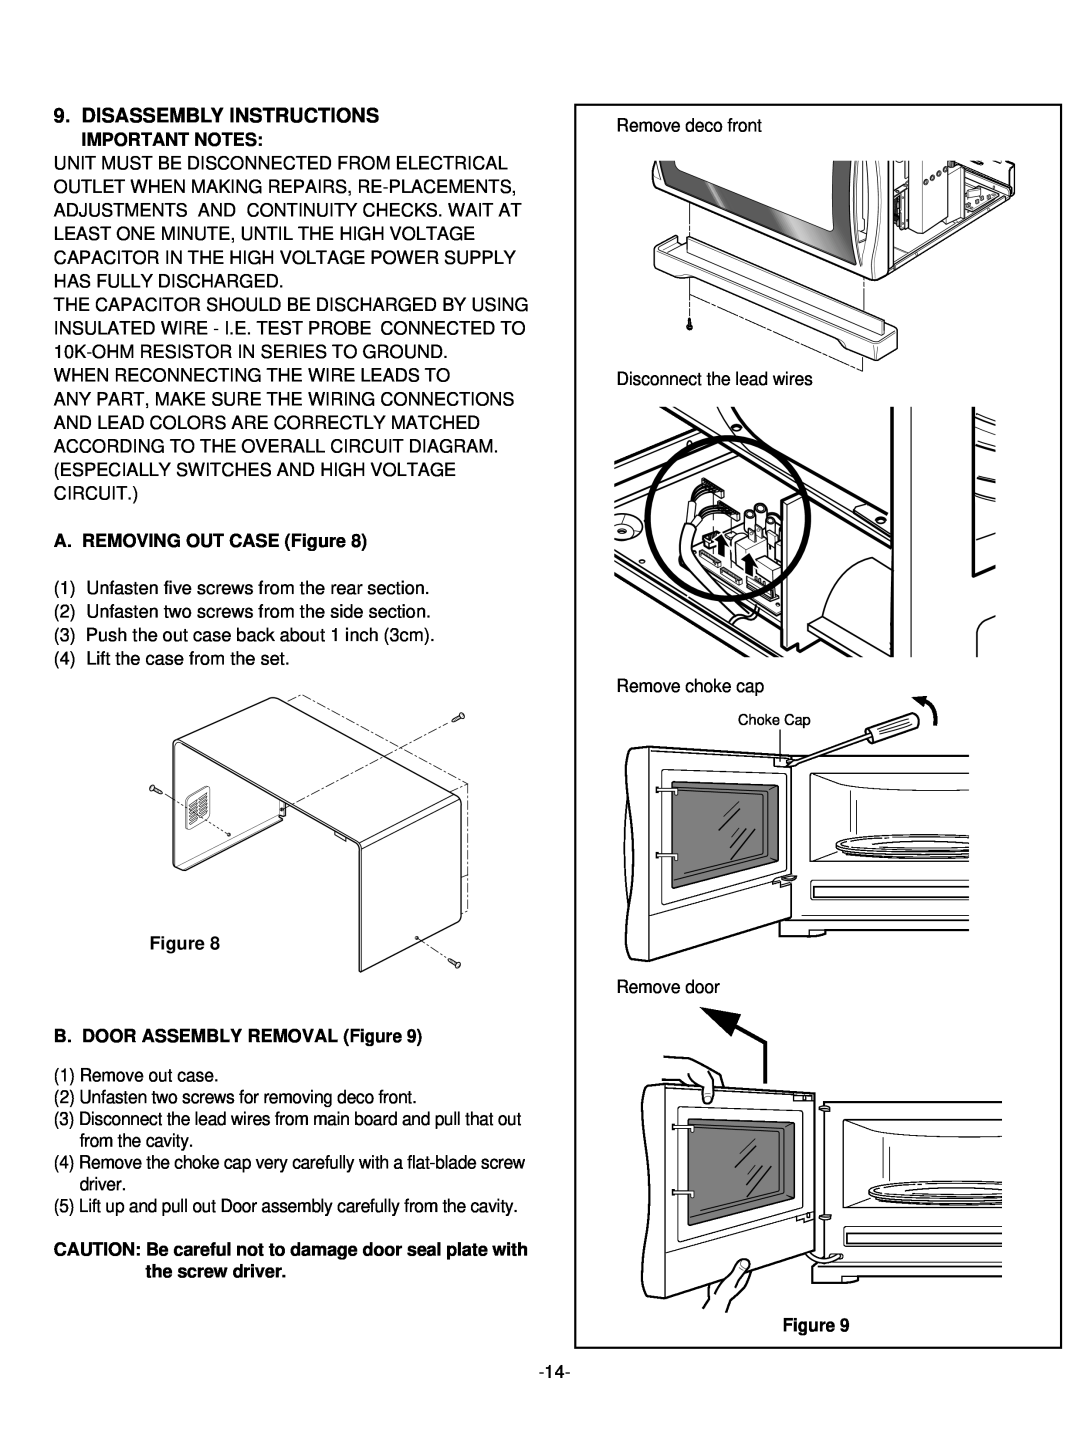 LG Electronics LRMM1430SB, LRMM1430SW manual Disassembly Instructions, Important Notes, A. REMOVING OUT CASE Figure 